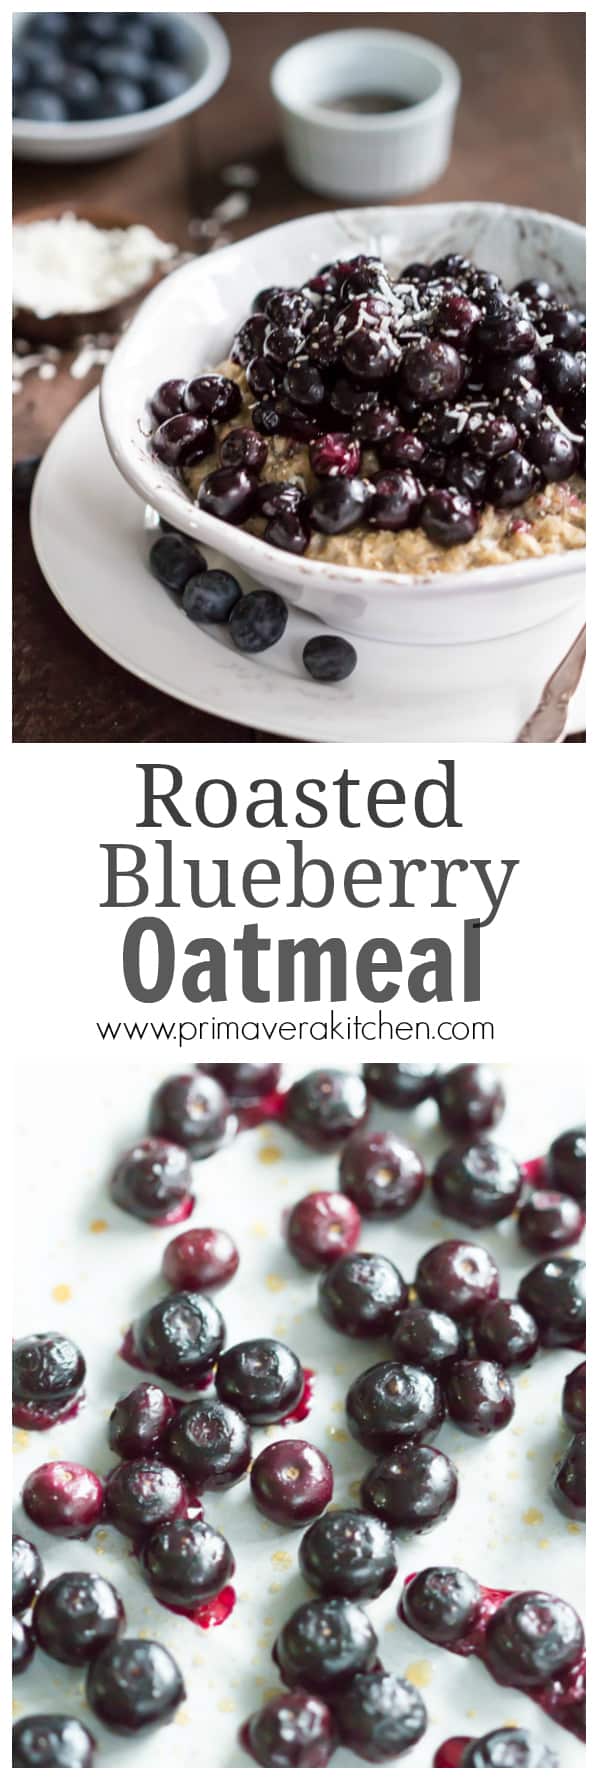 Roasted Blueberry Oatmeal - This Roasted Blueberry Oatmeal is a healthy and delicious way to start your day. It is made with coconut milk and the berries are roasted with maple syrup. 